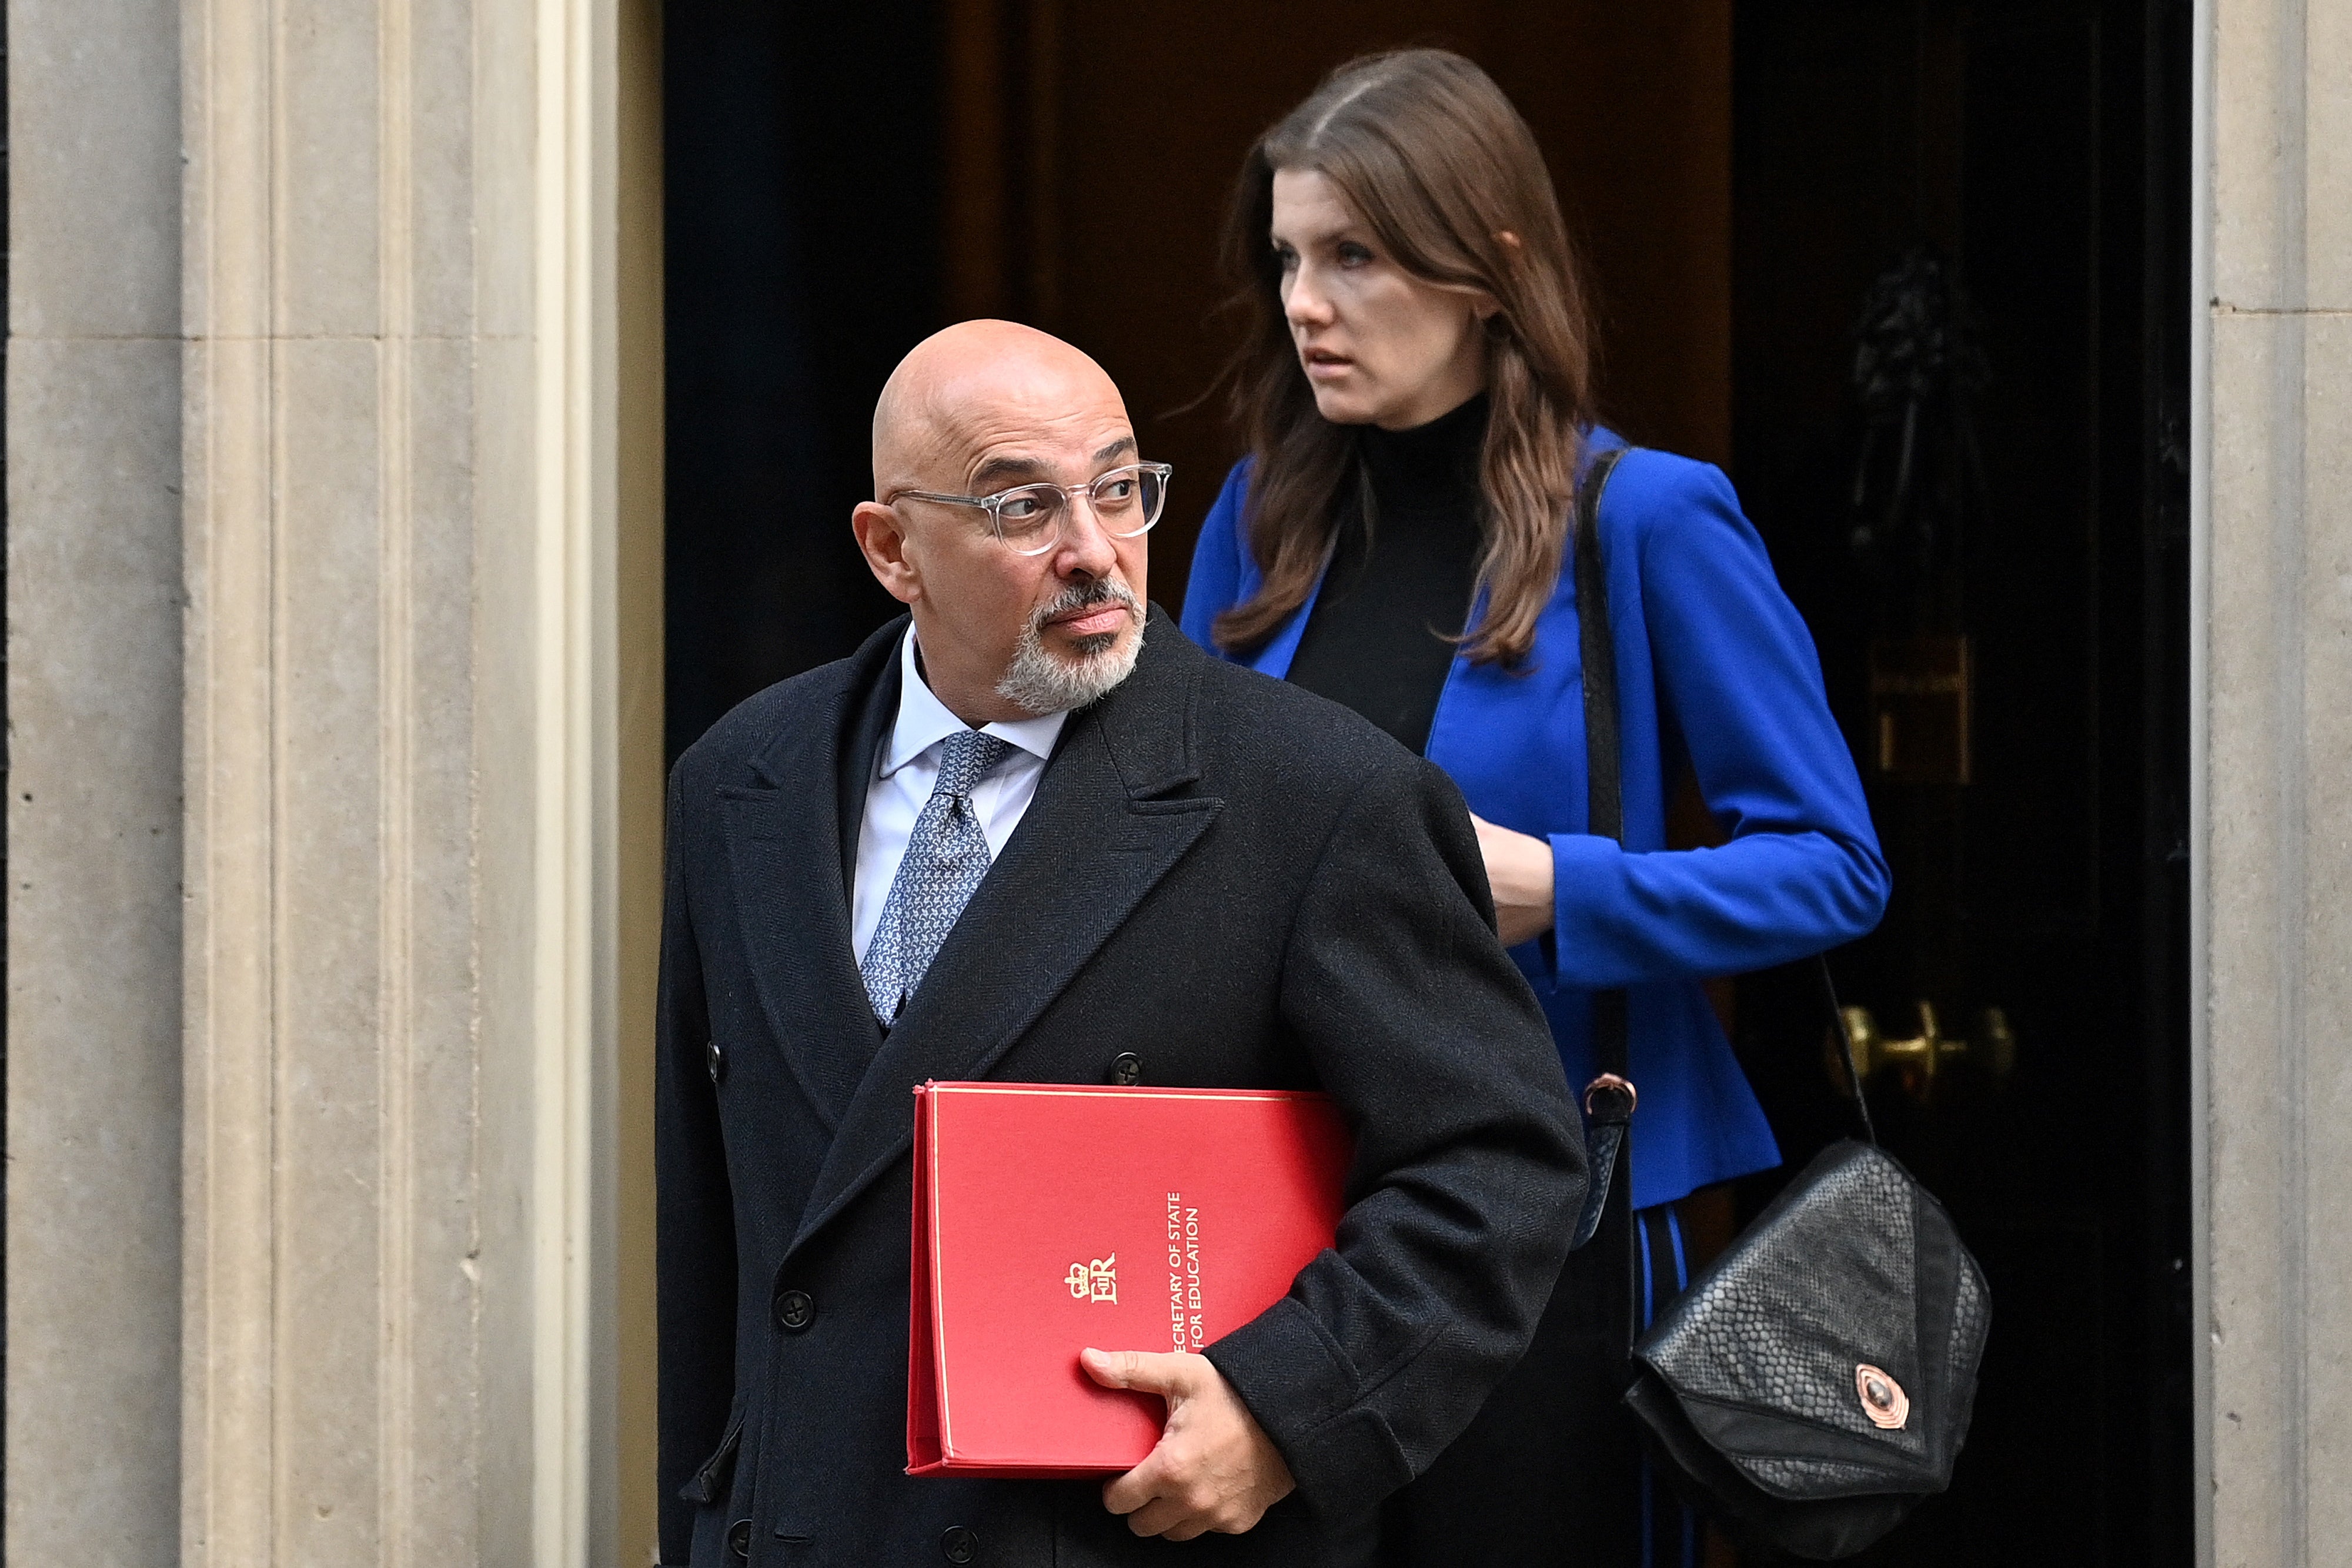 Nadhim Zahawi is the 64th Conservative MP to announce he will step down at the election